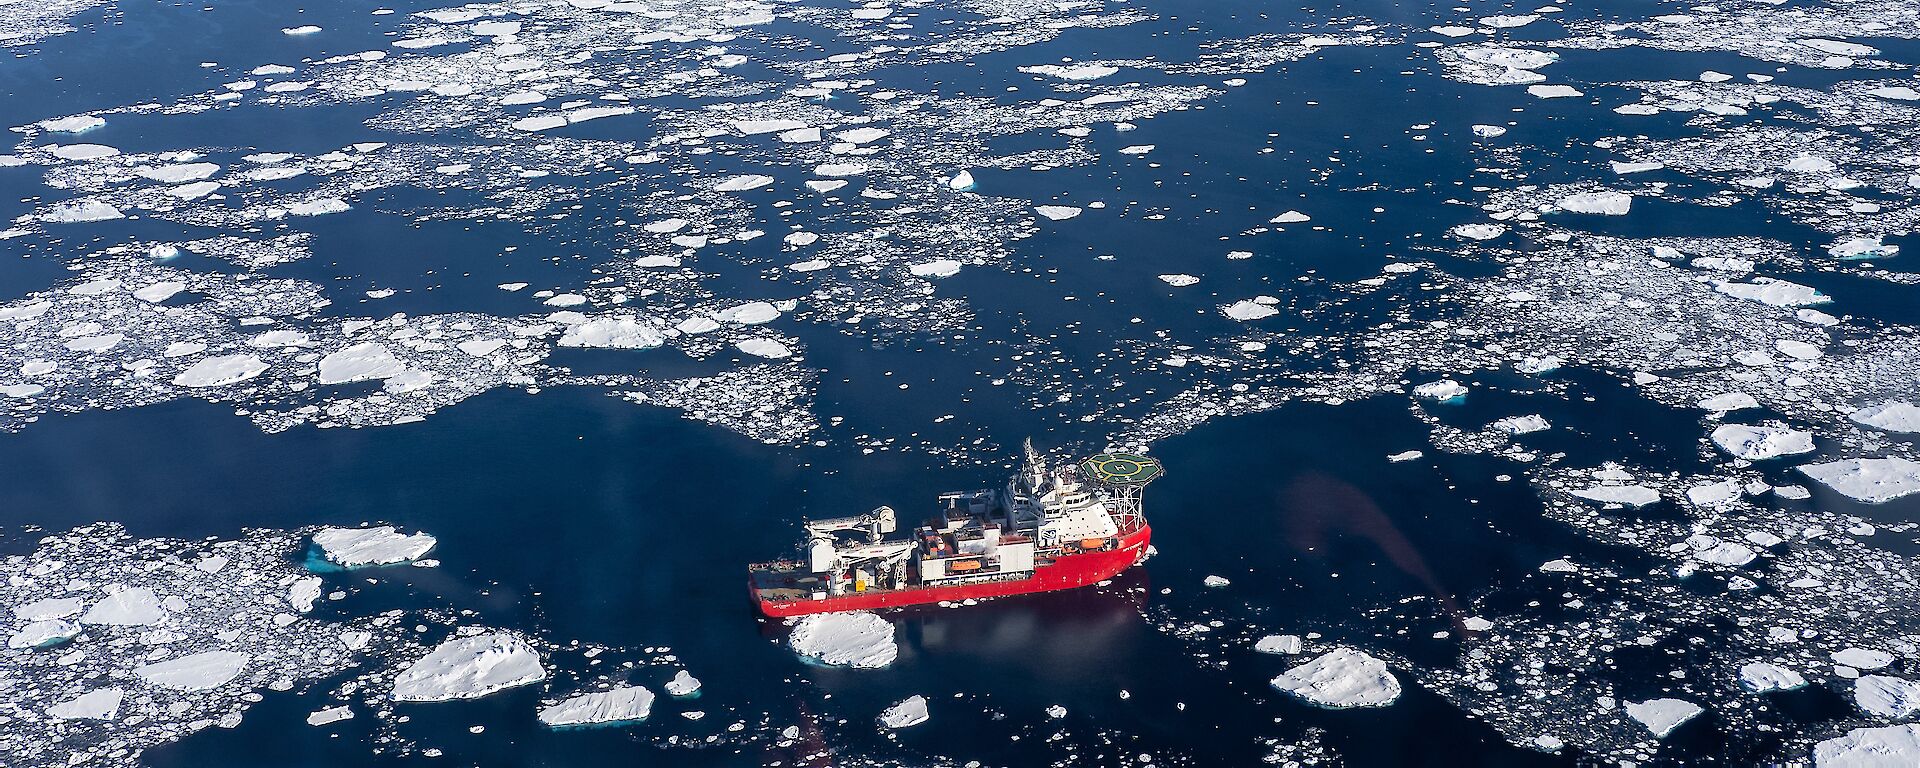 Aerial view of the MPV Everest in the sea ice in the Southern Ocean